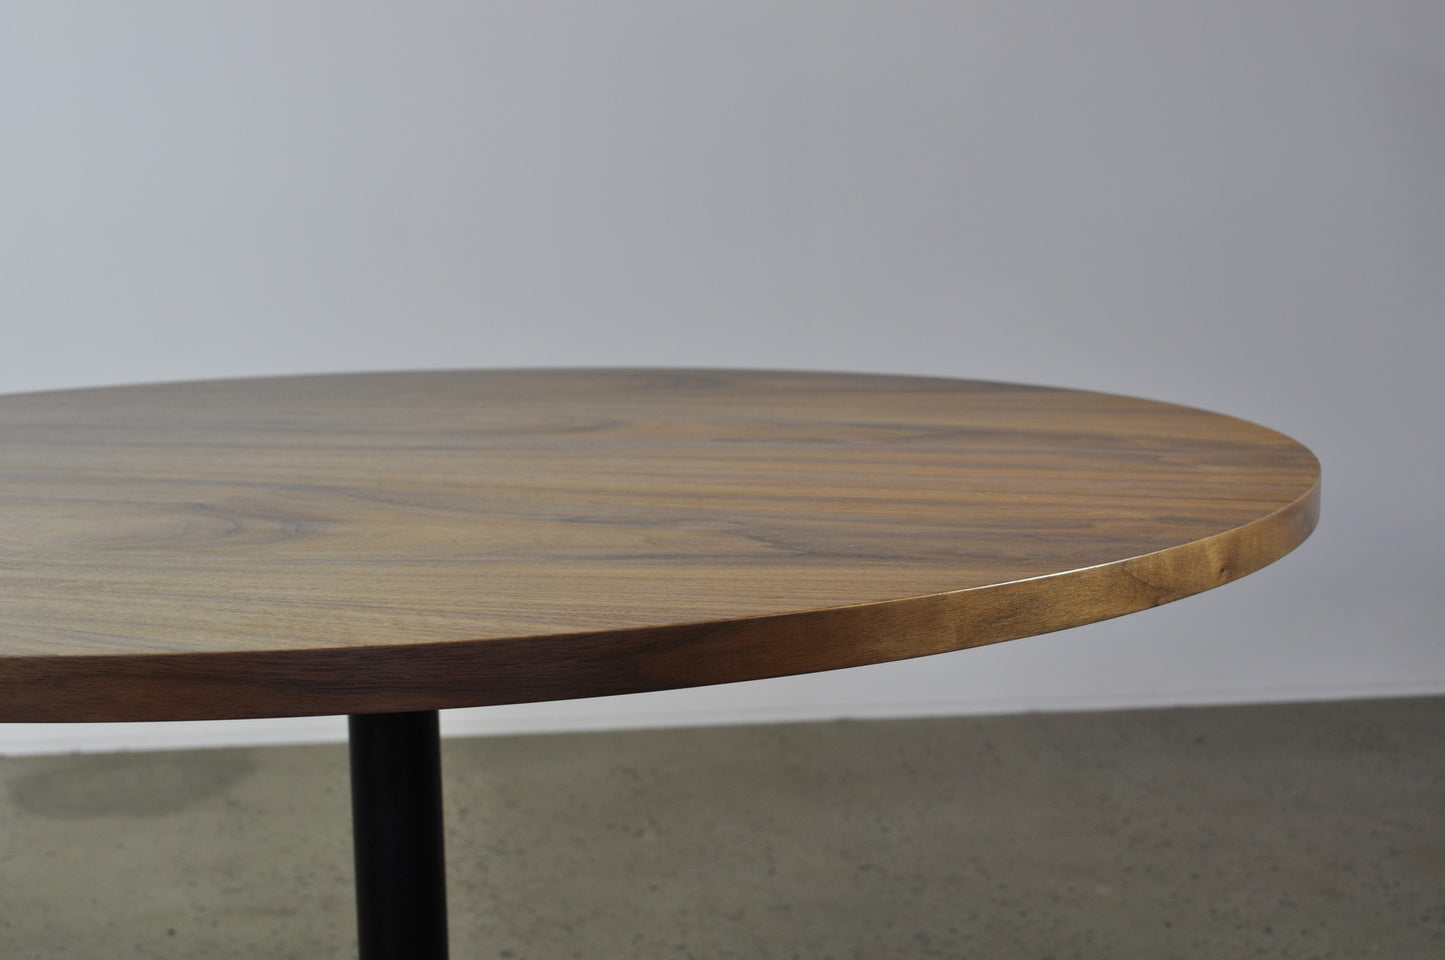 Eames Round American Walnut table - Case 22